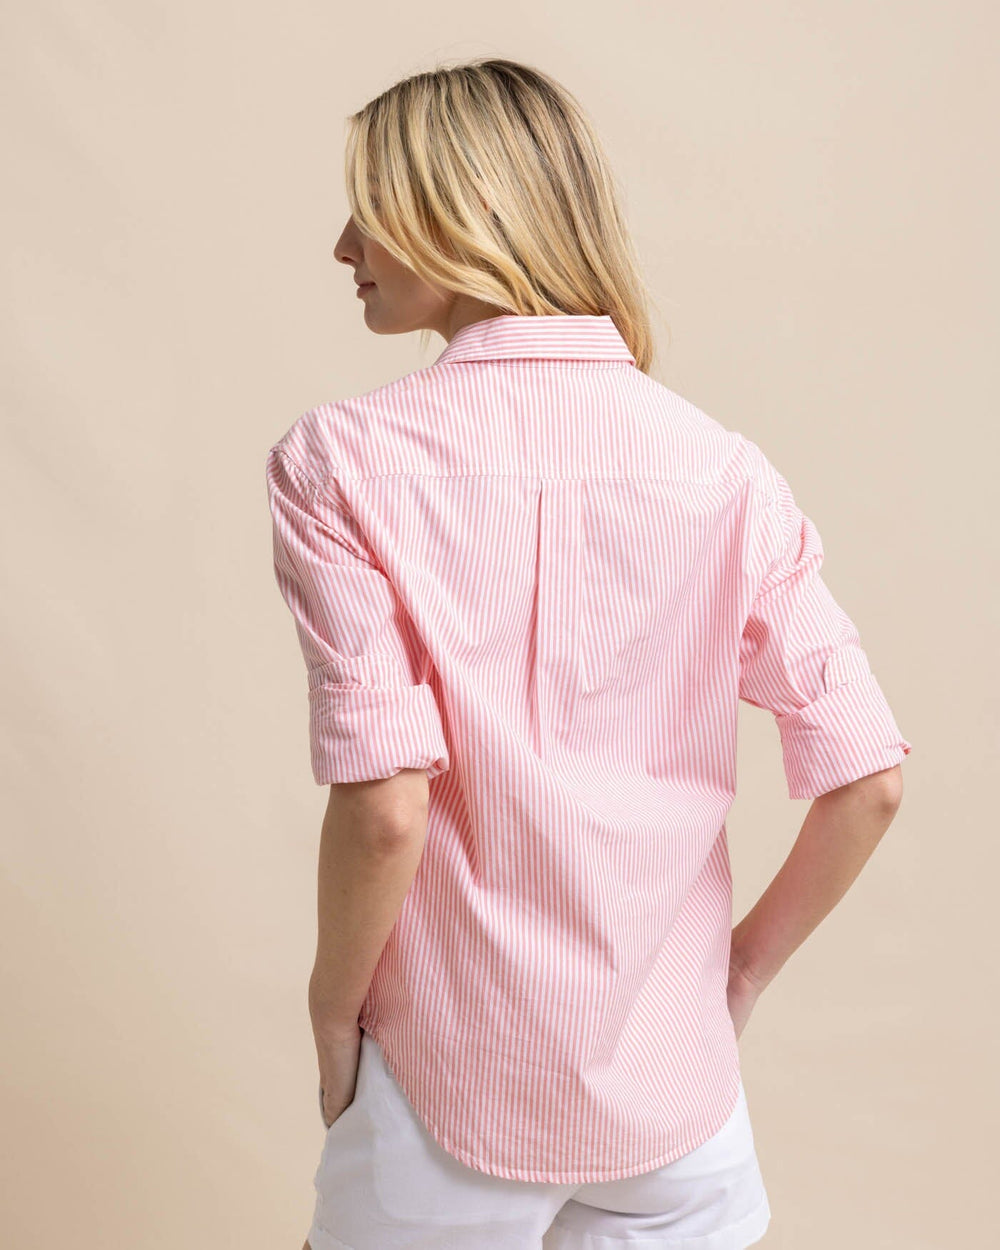 The back view of the Southern Tide Katherine Stripe Shirt by Southern Tide - Conch Shell